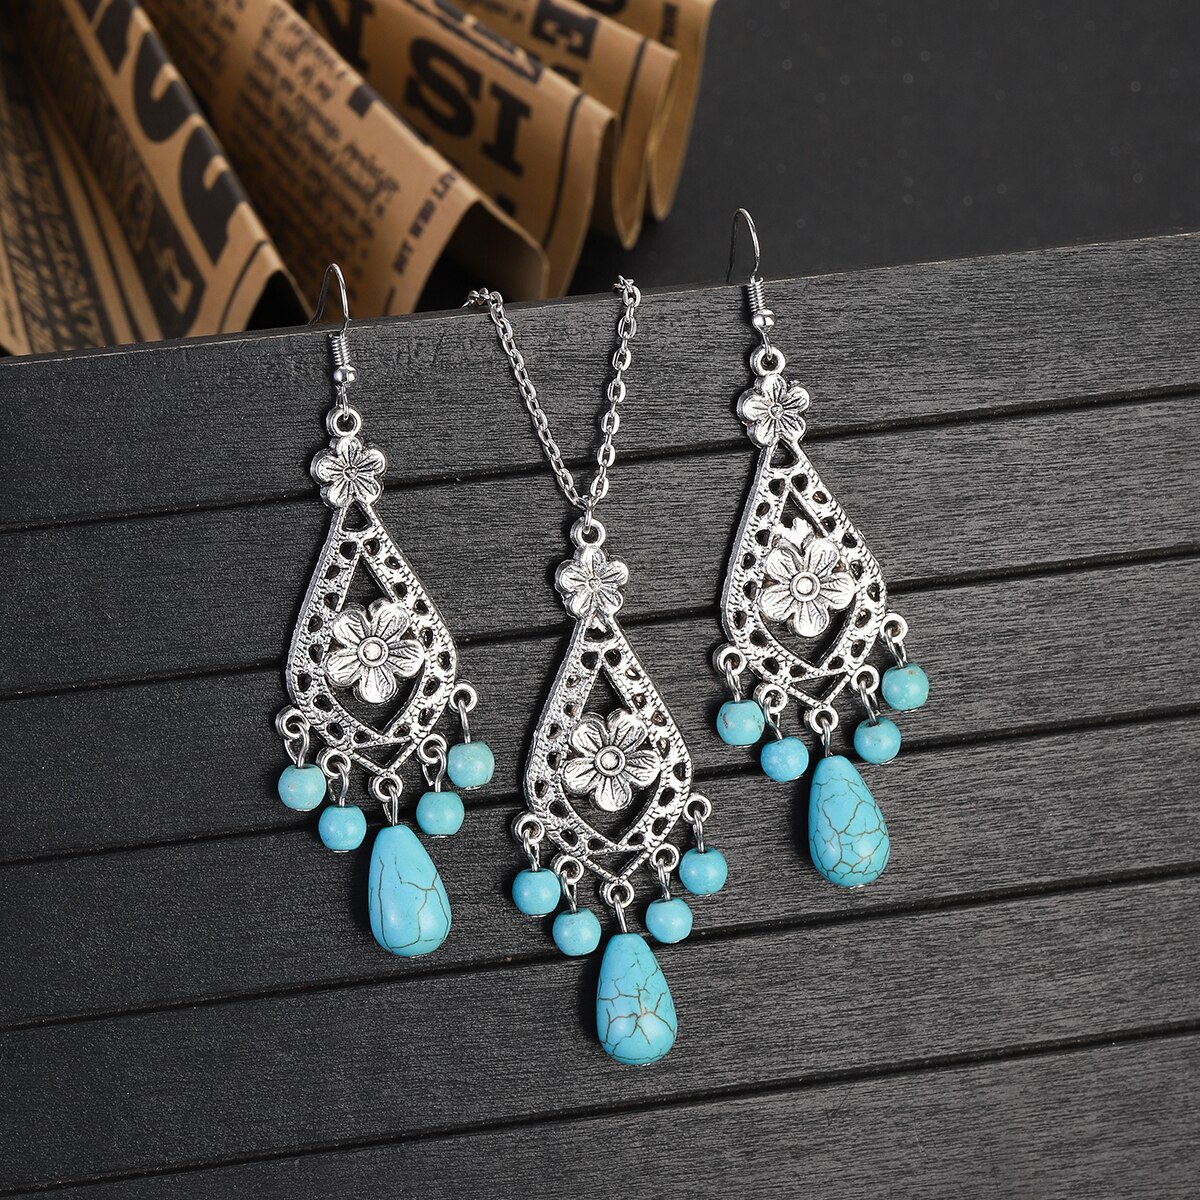 Ethnic-Boho-Blue-Stone-Tassel-Jewelry-Set-Charm-Ladies-Vintage-Jewelry-Silver-Color-Hollow-Flower-Ch-1005005134002231-11